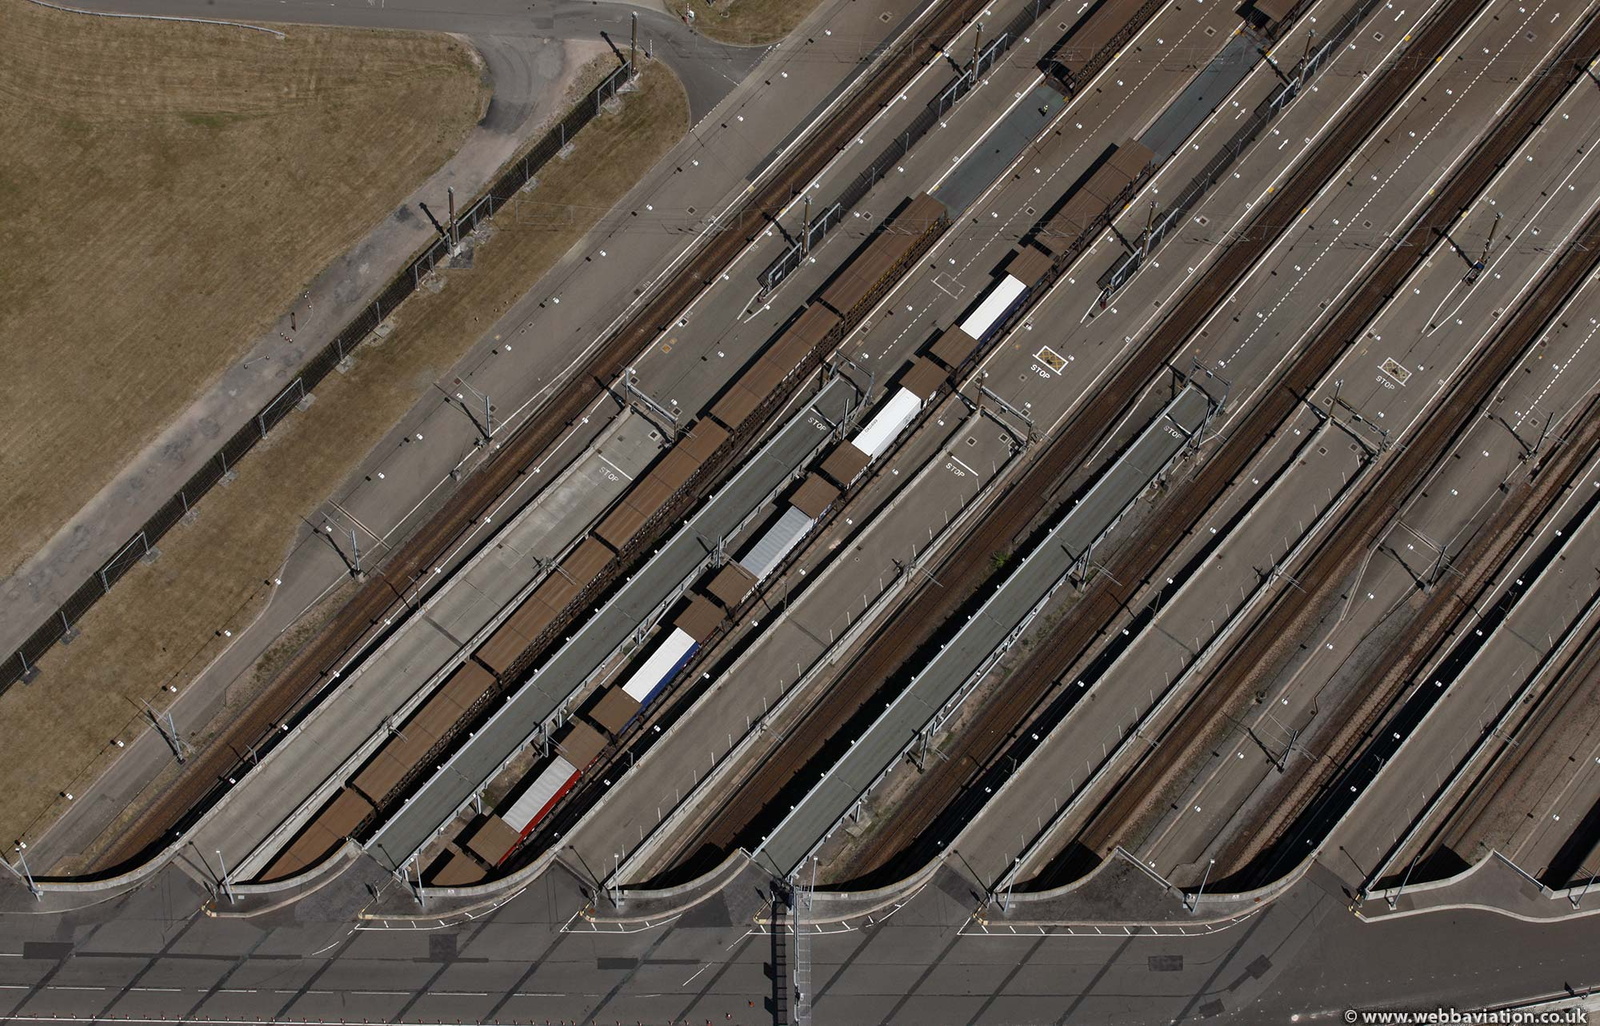  Eurotunnel Shuttle loading ramps from the air